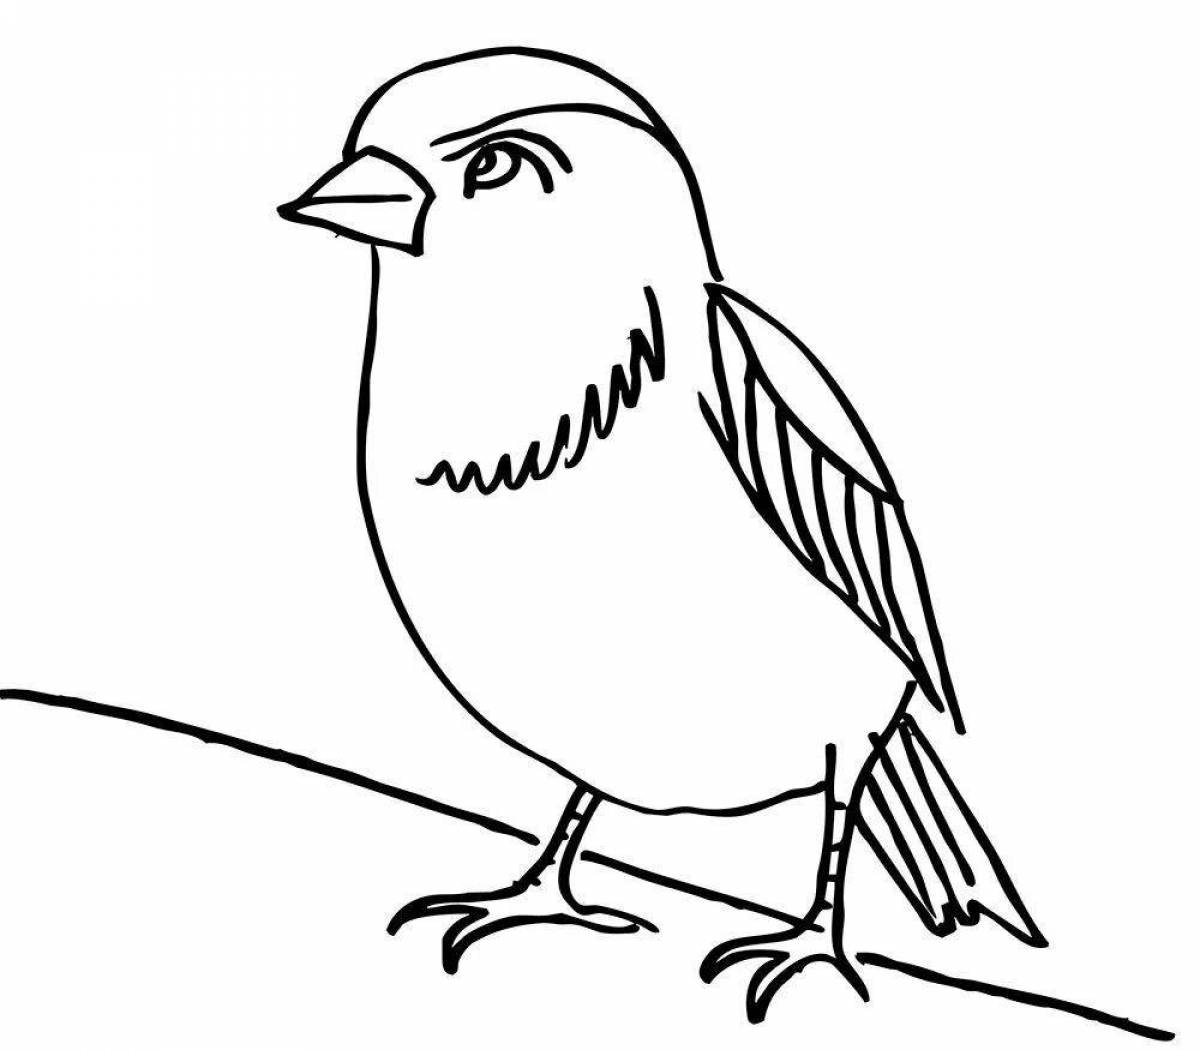 Coloring page majestic sparrow in winter